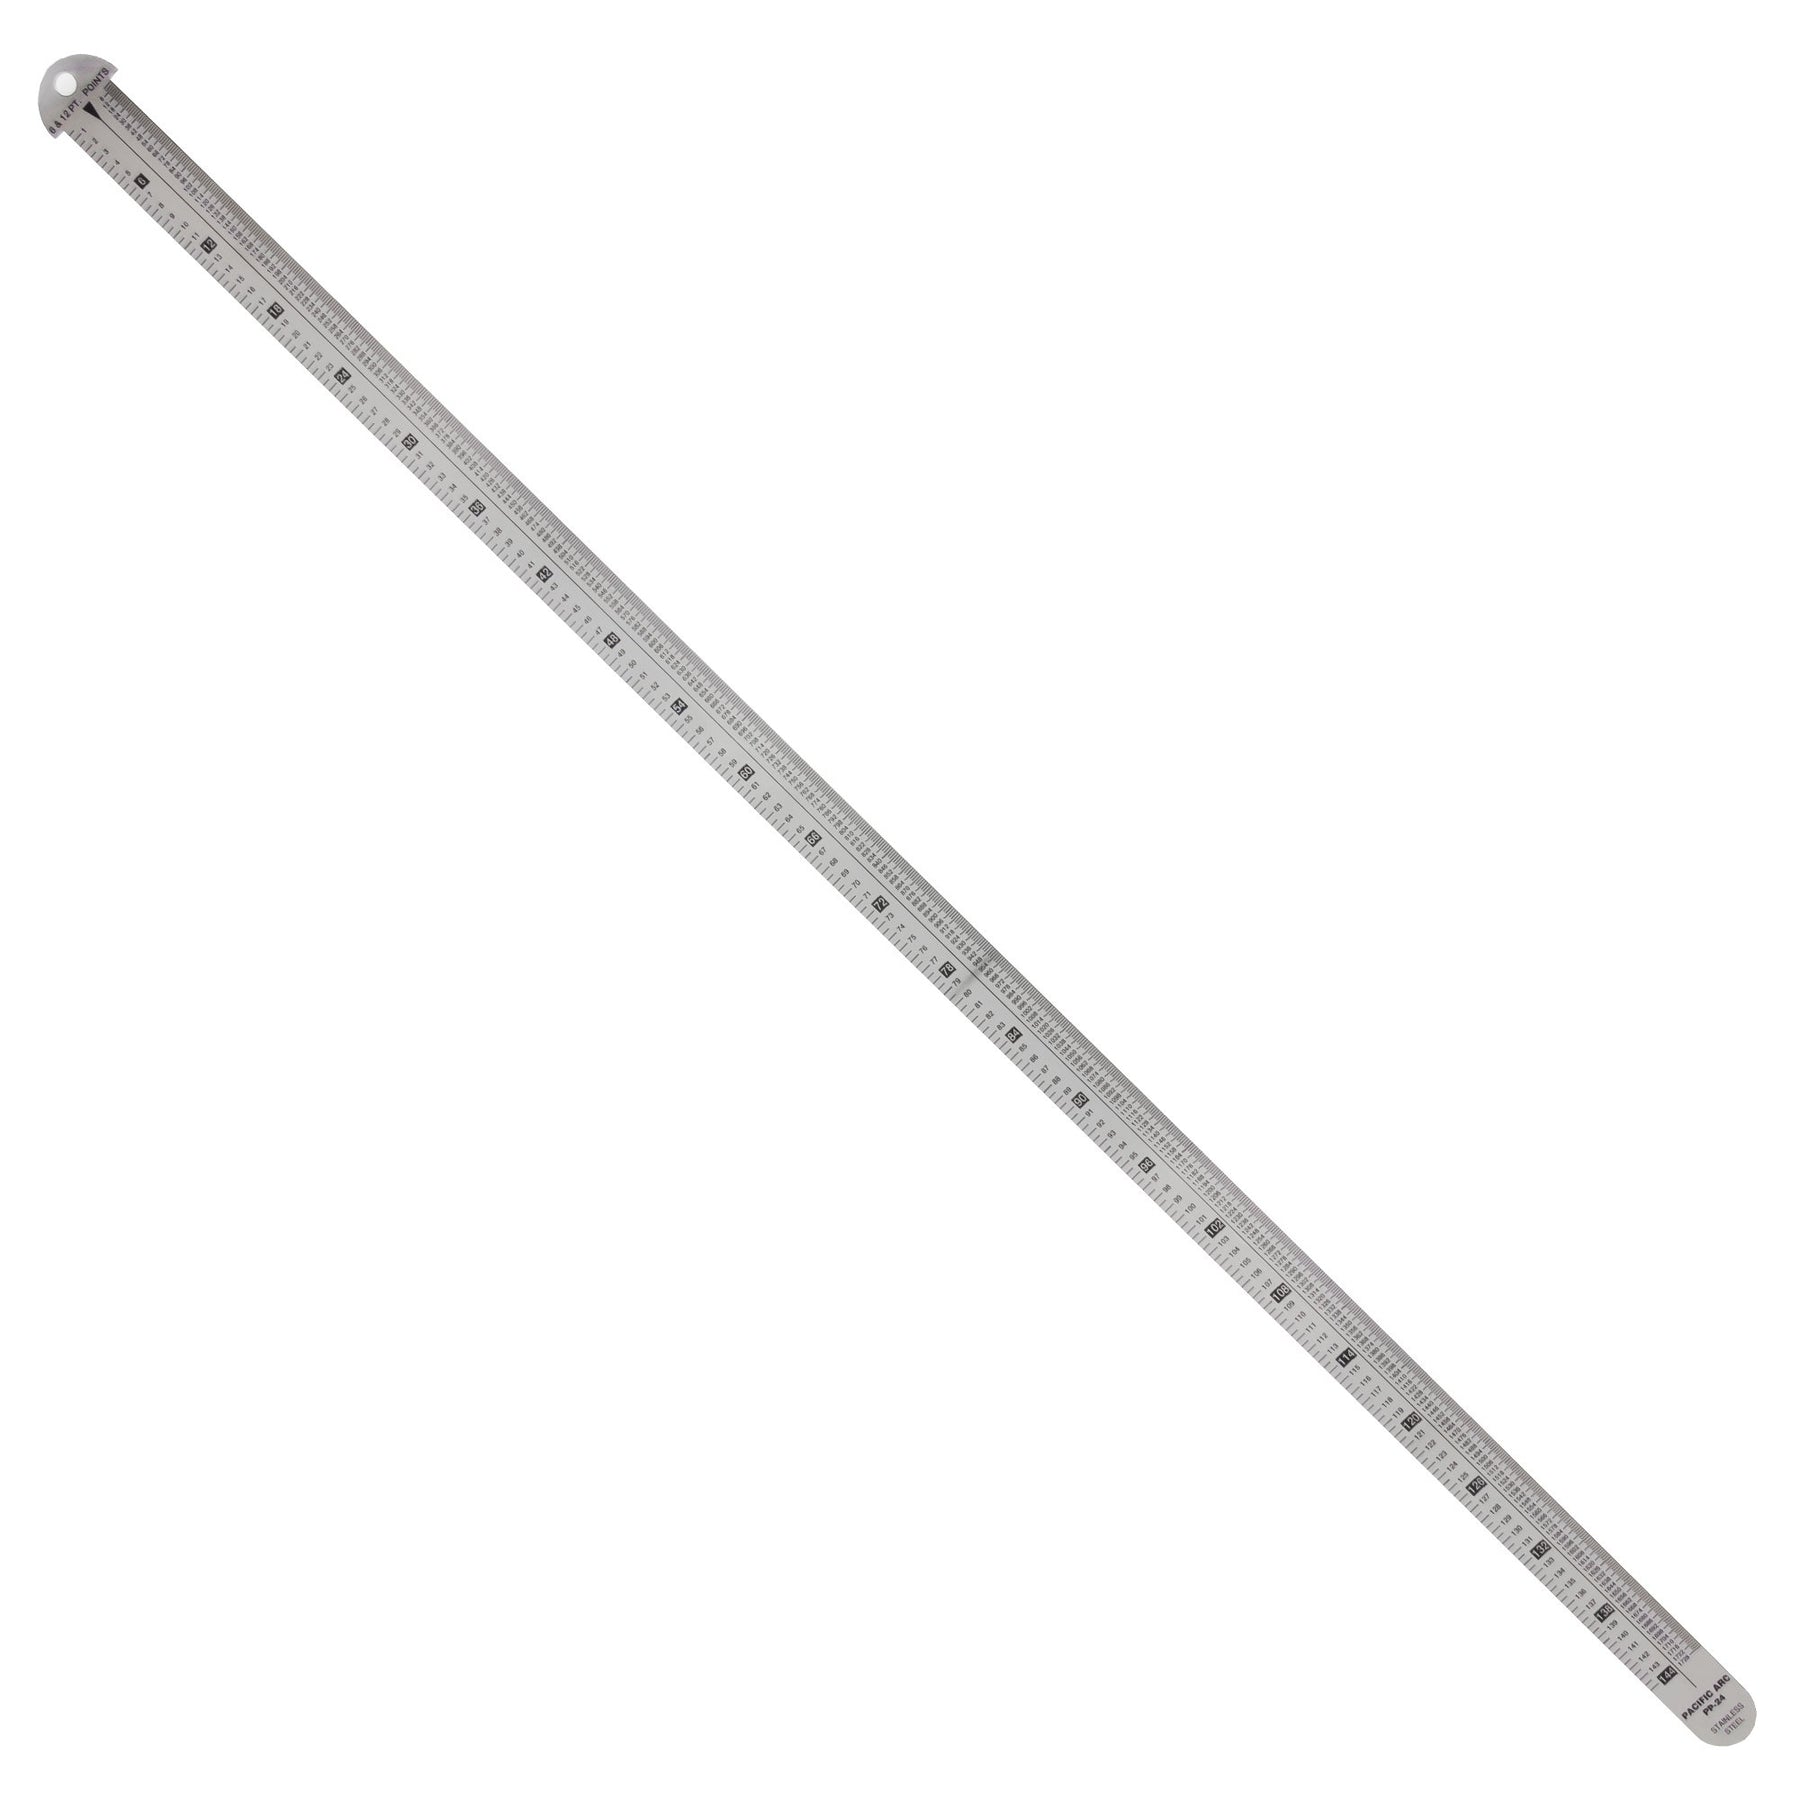 Pacific Arc, Pica Pole Metal Ruler, with Pica, Points, Inches, and Agate Measurements, Stainless Steel Ruler for Drafting